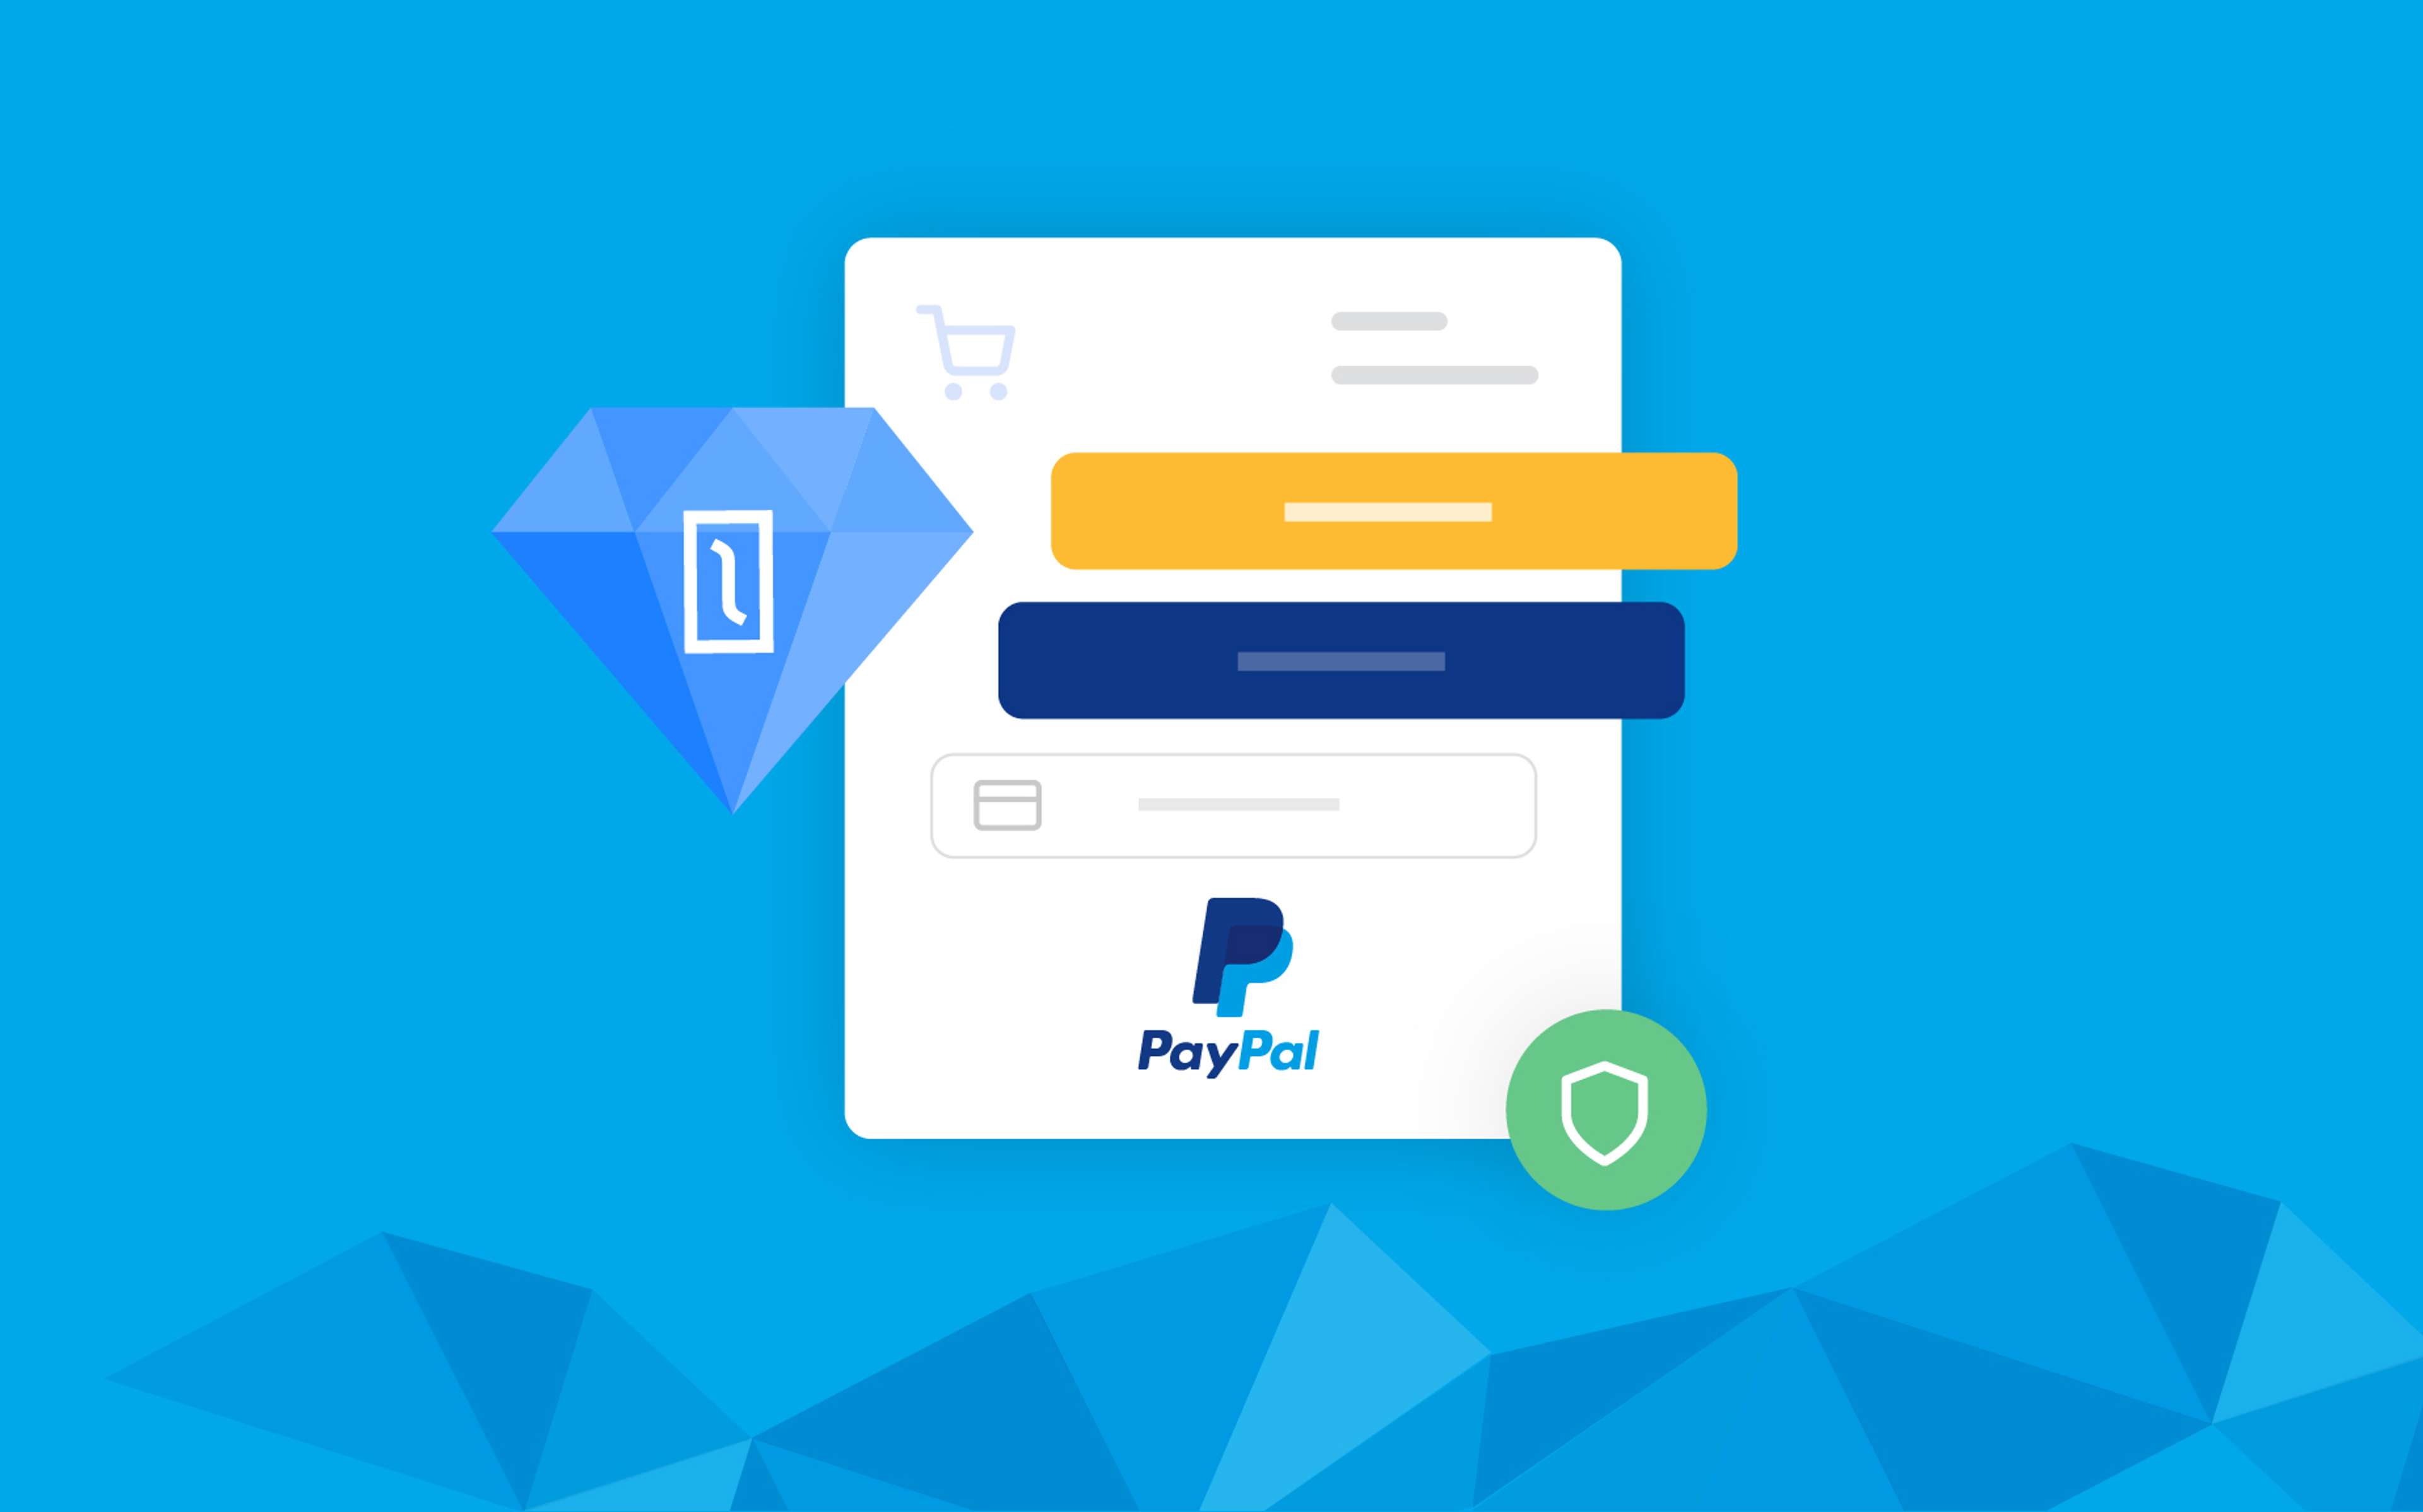 Introducing Solidus PayPal Commerce Platform